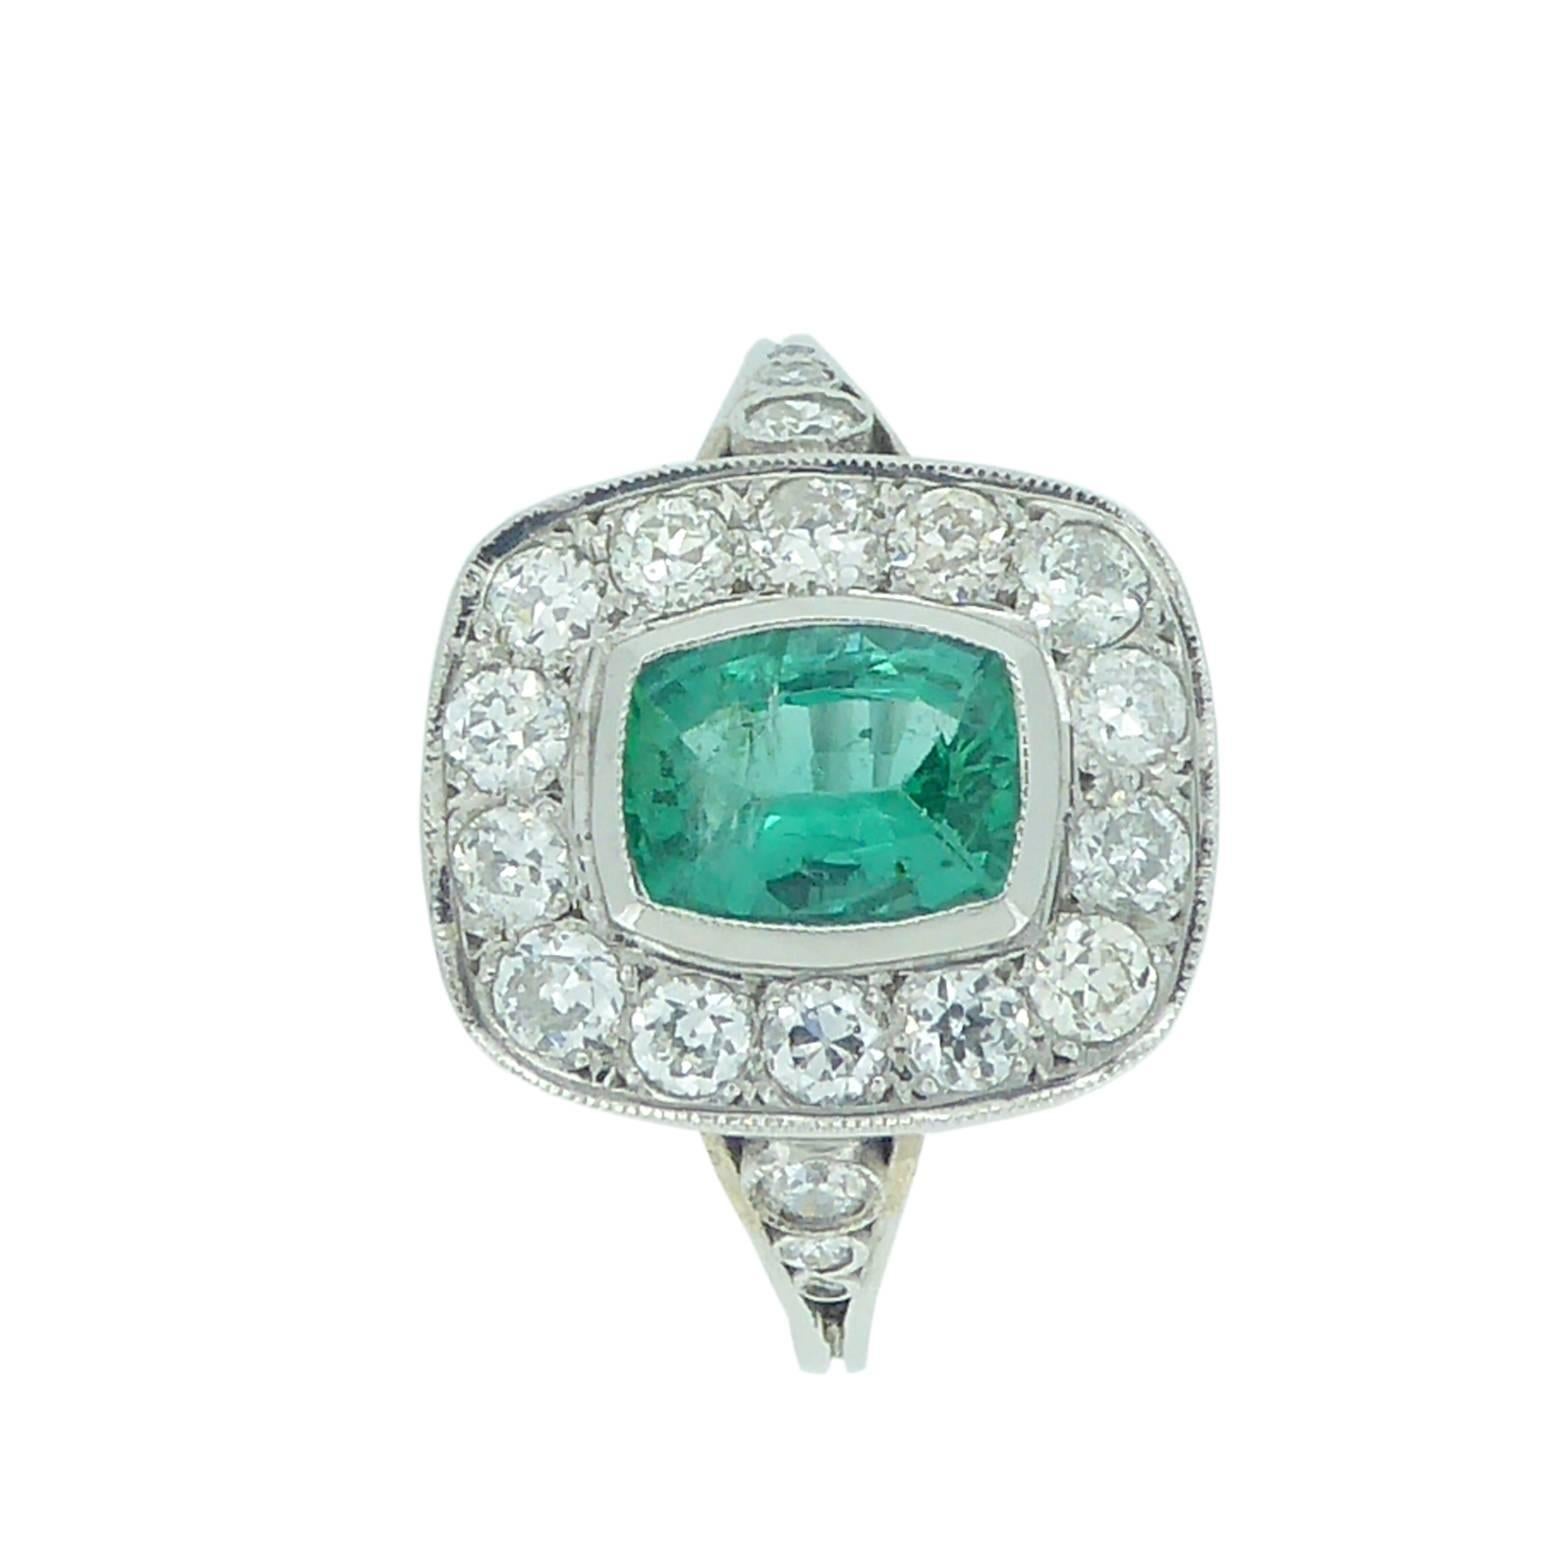 A lovely cushion shaped emerald of good green colour sits in a halo of brilliant cut diamonds, the whole arrangement reminiscent of the Art Deco era.  
This pre-owned cluster ring is perfect as a dress or engagement ring and the diamond decorated